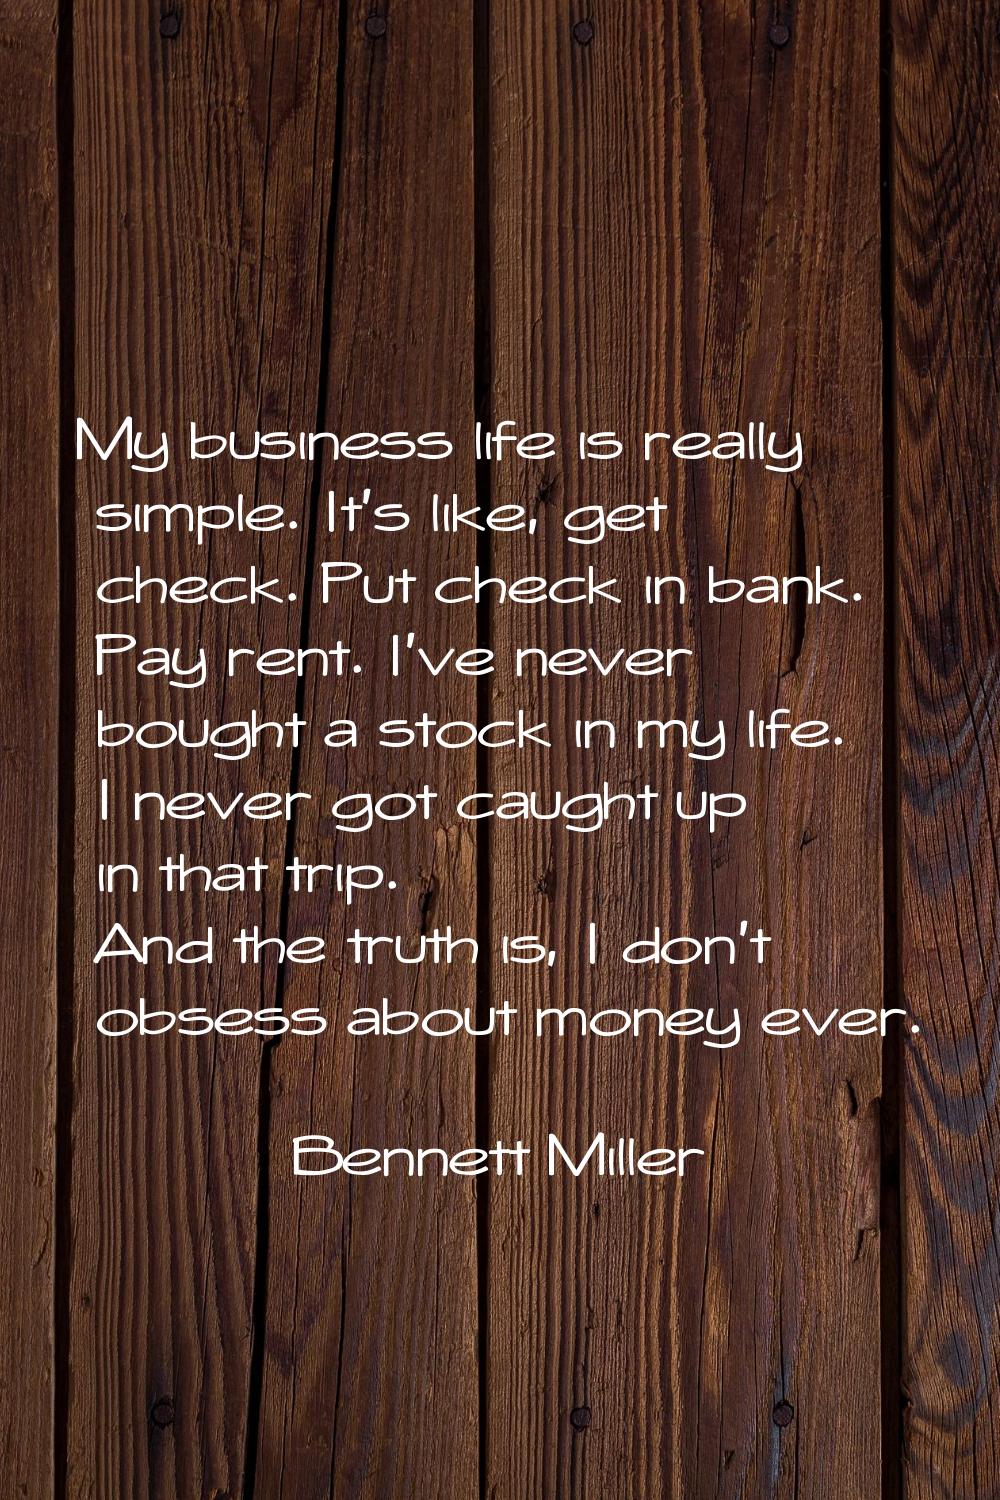 My business life is really simple. It's like, get check. Put check in bank. Pay rent. I've never bo